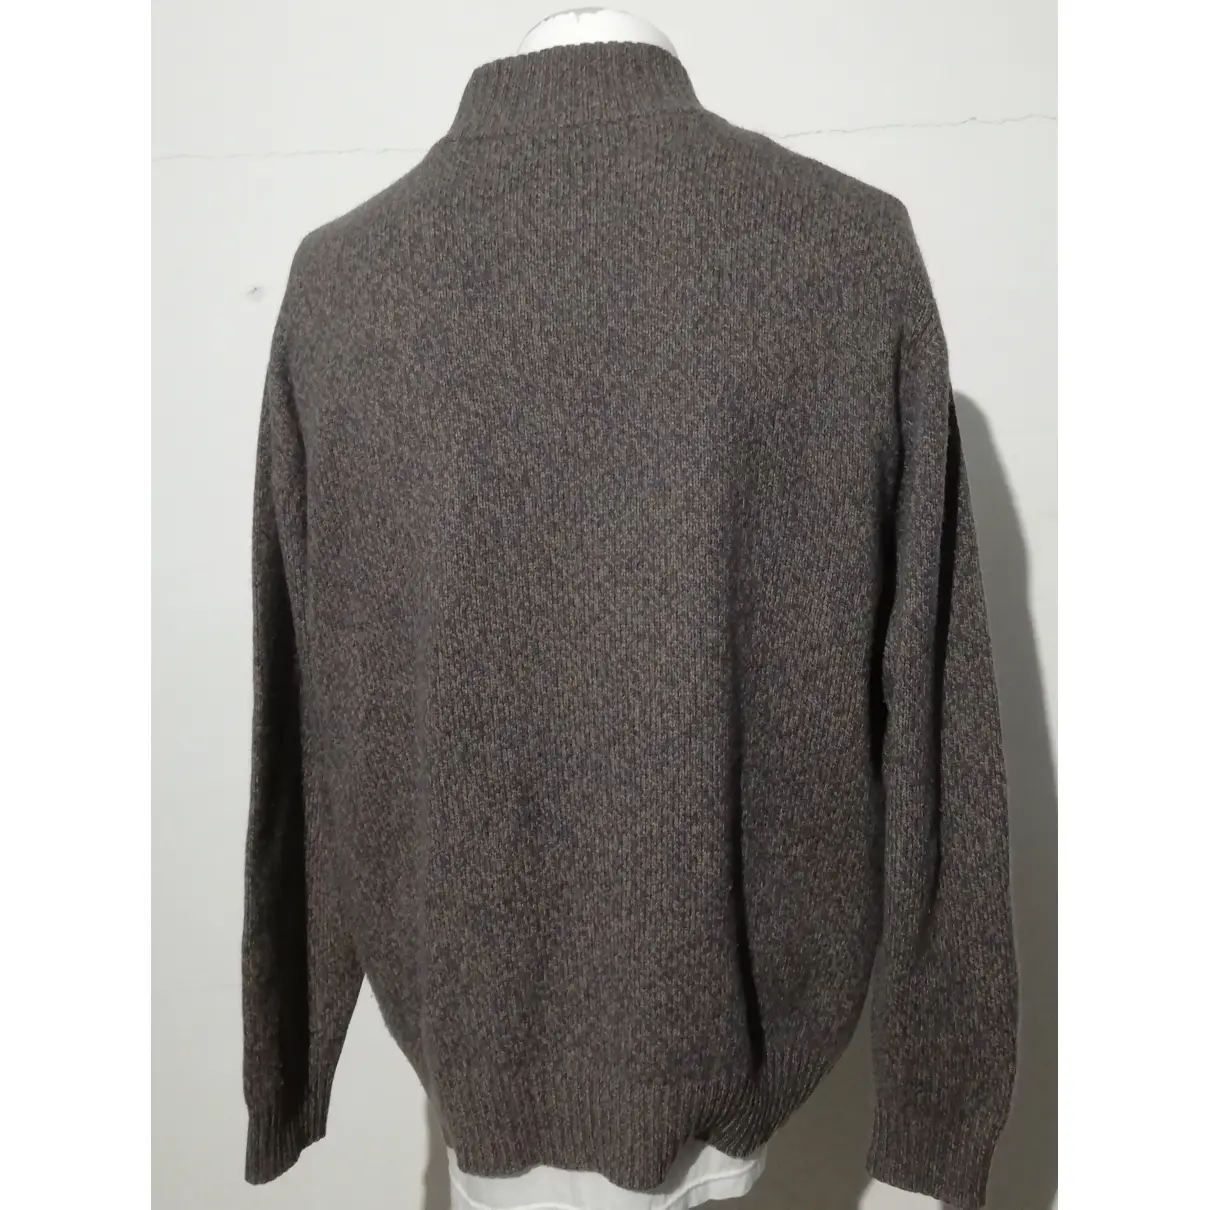 Buy Brooksfield Cashmere pull online